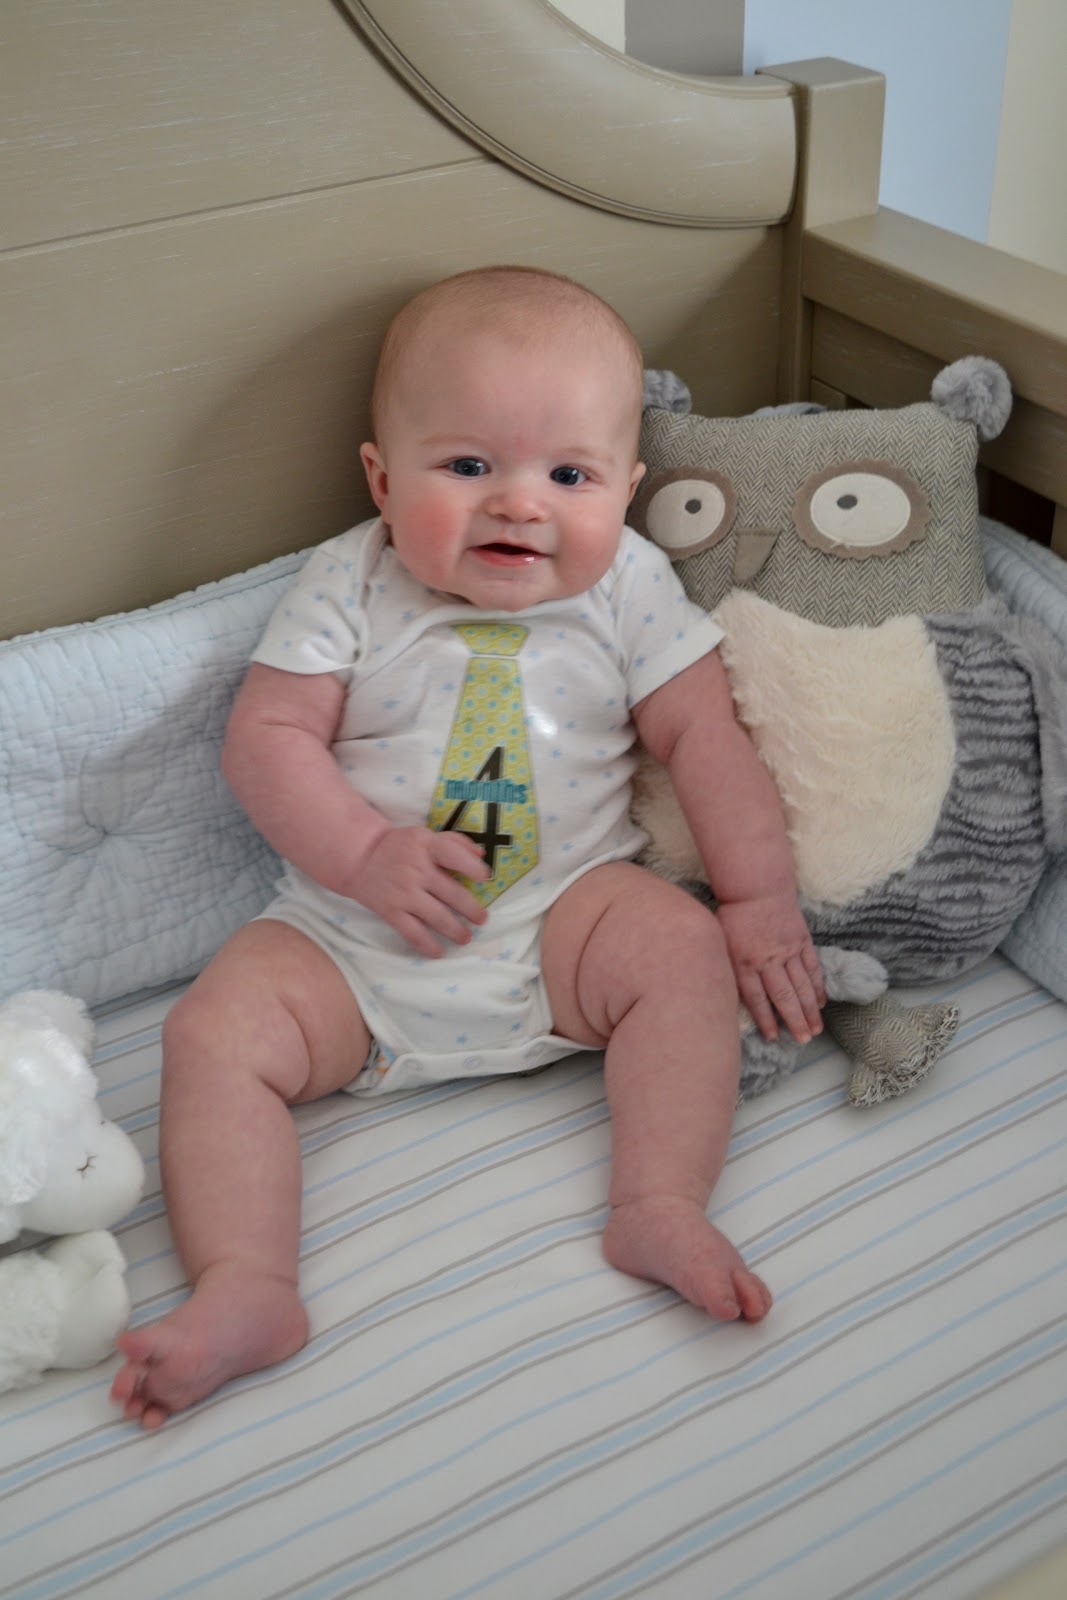 4 Month Old Baby Boy Development: What to Expect